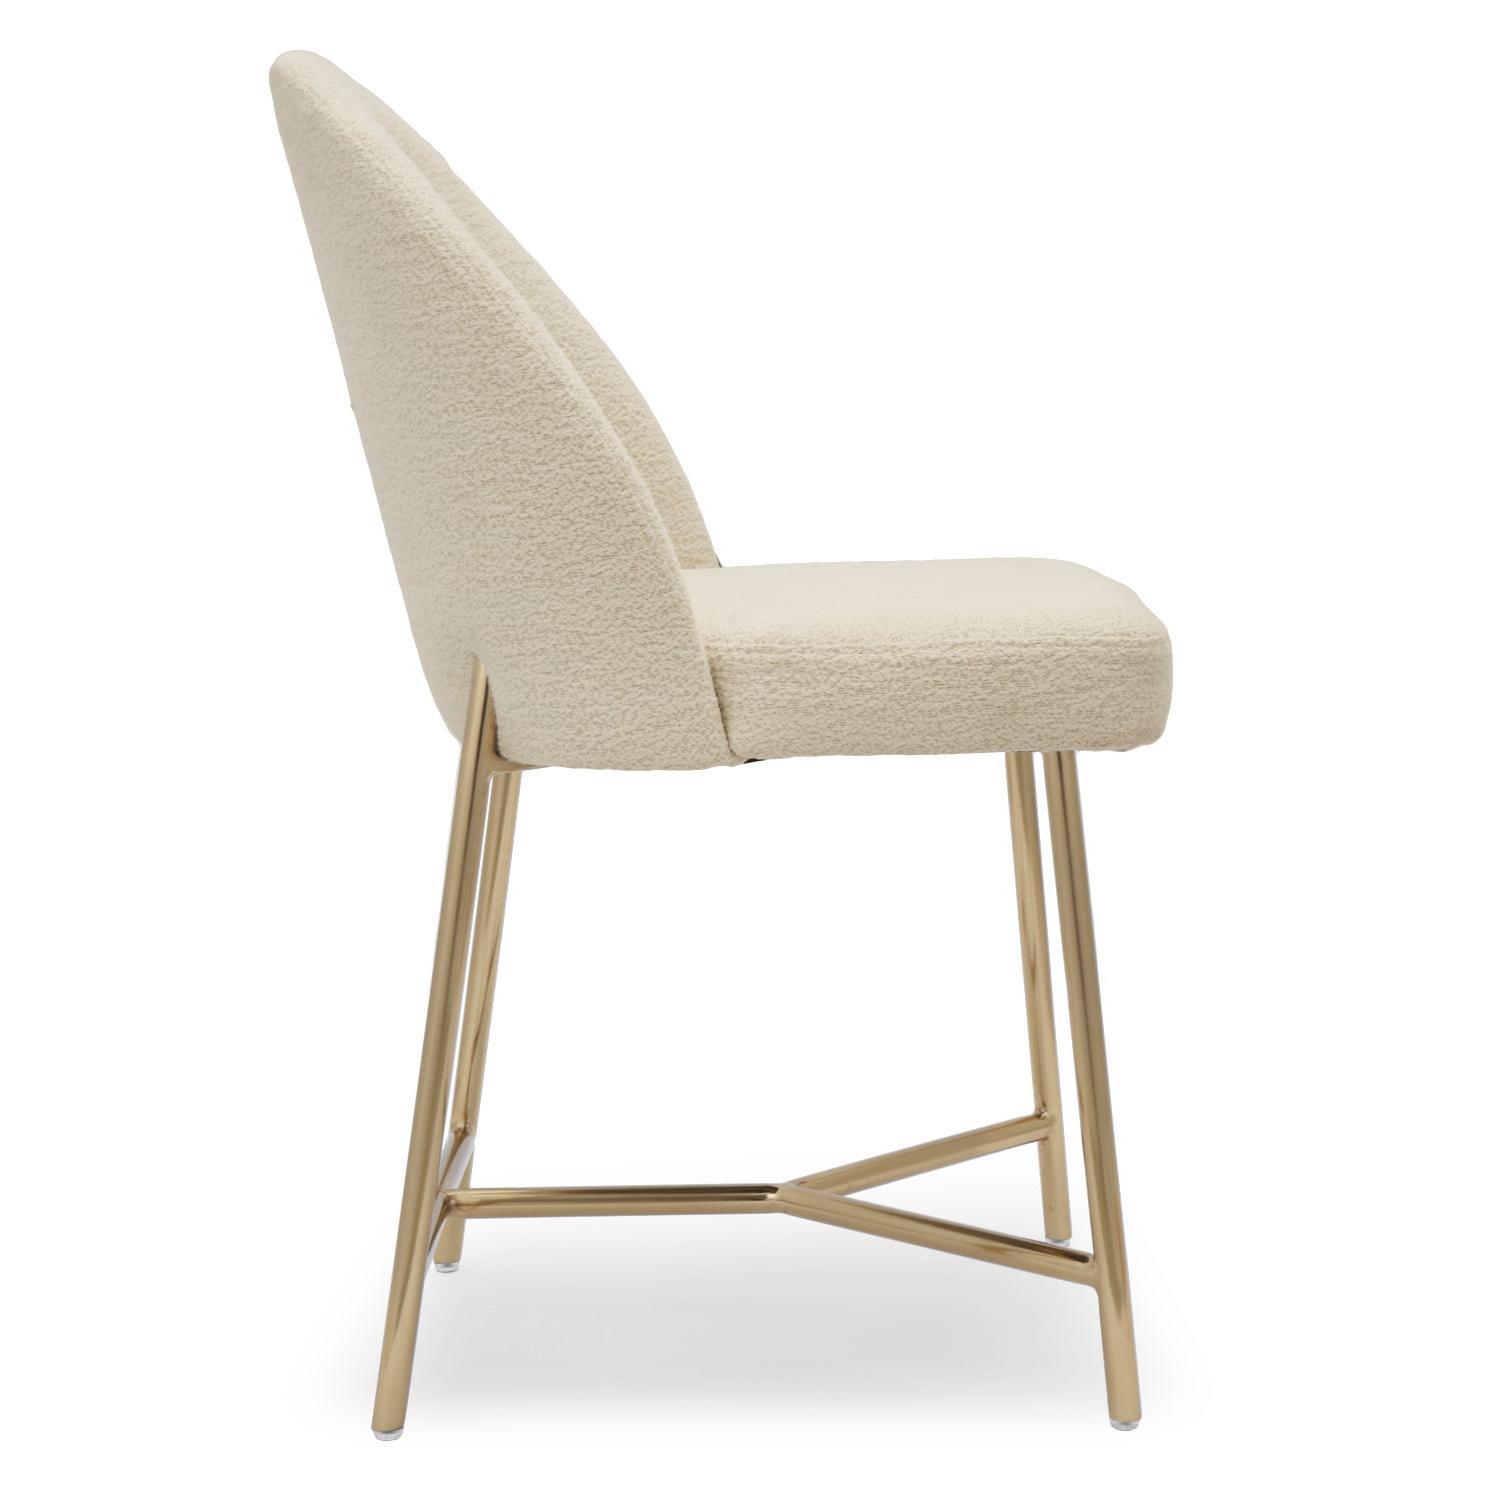 Elegant Fabric Lounge Dining Chair Featured Image